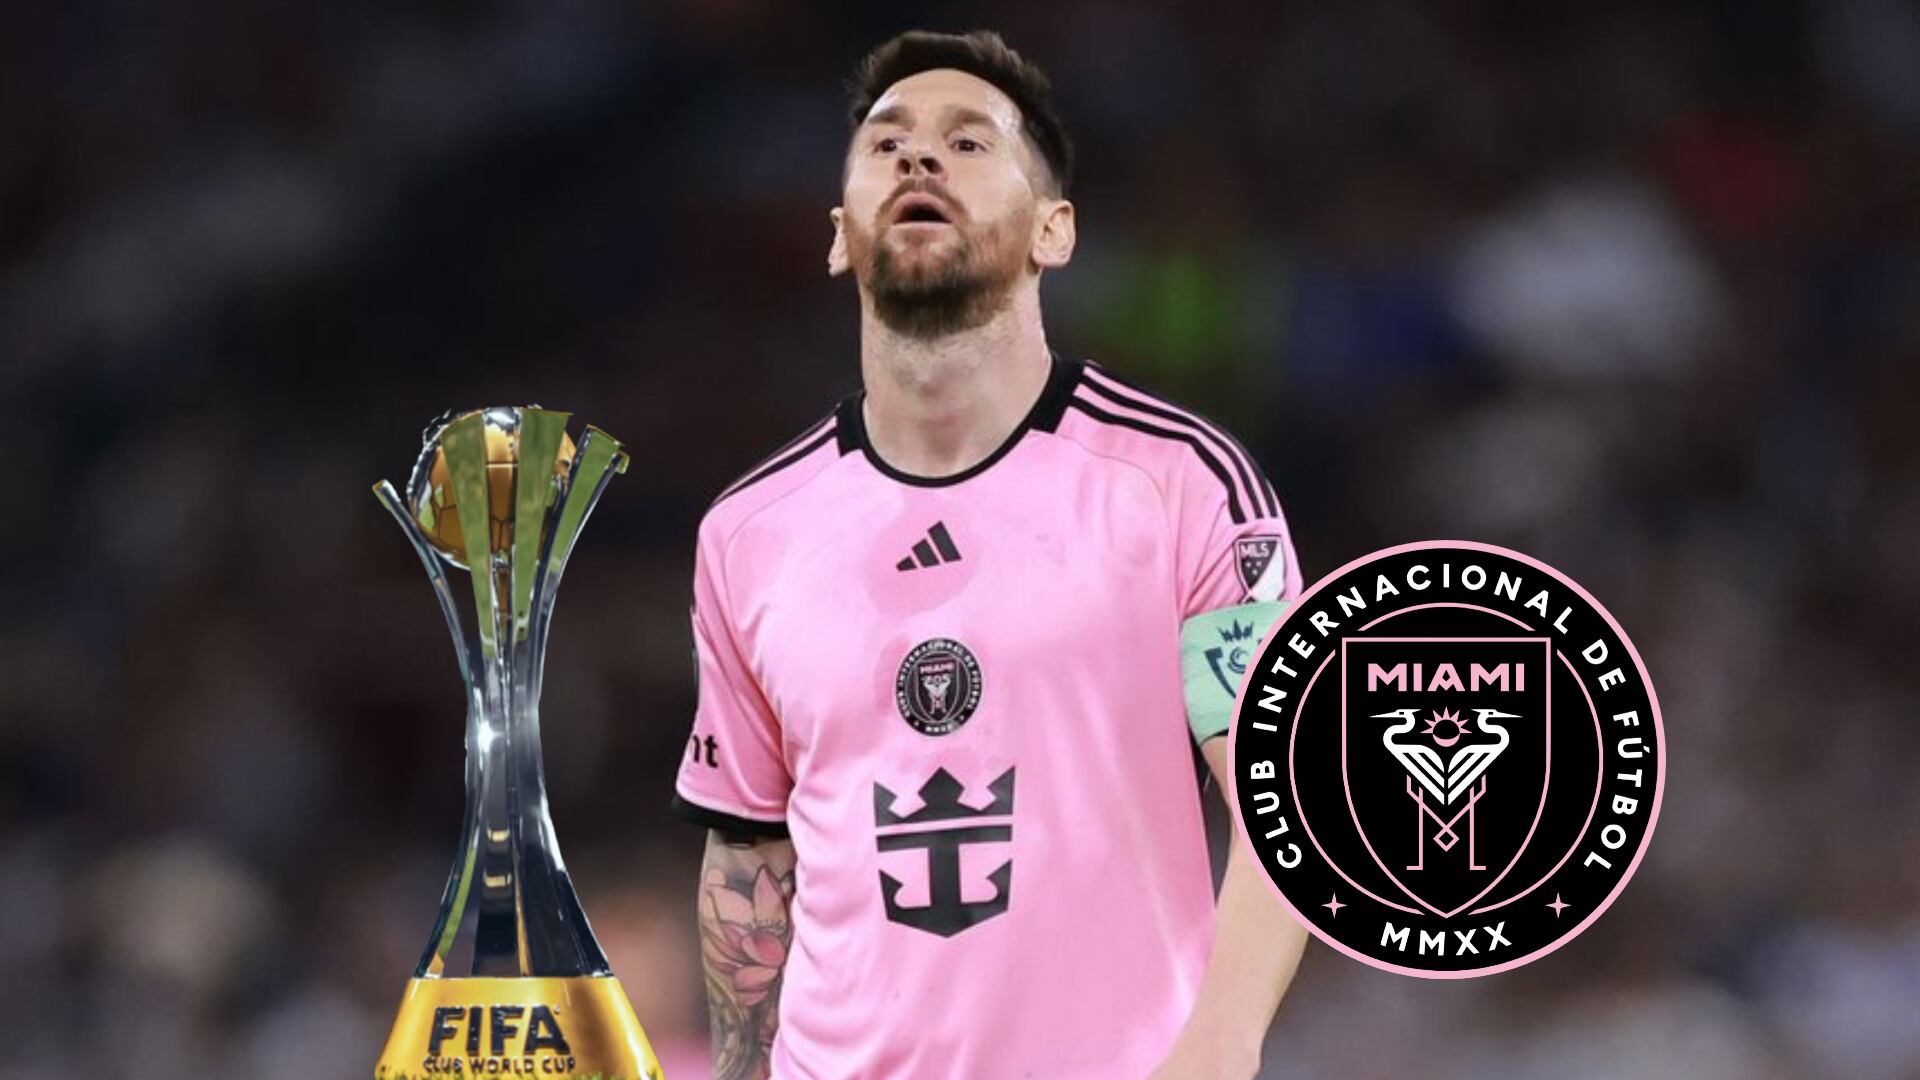 The way Messi and Inter Miami can be helped to qualify for Club World Cup despite being eliminated from Concachampions